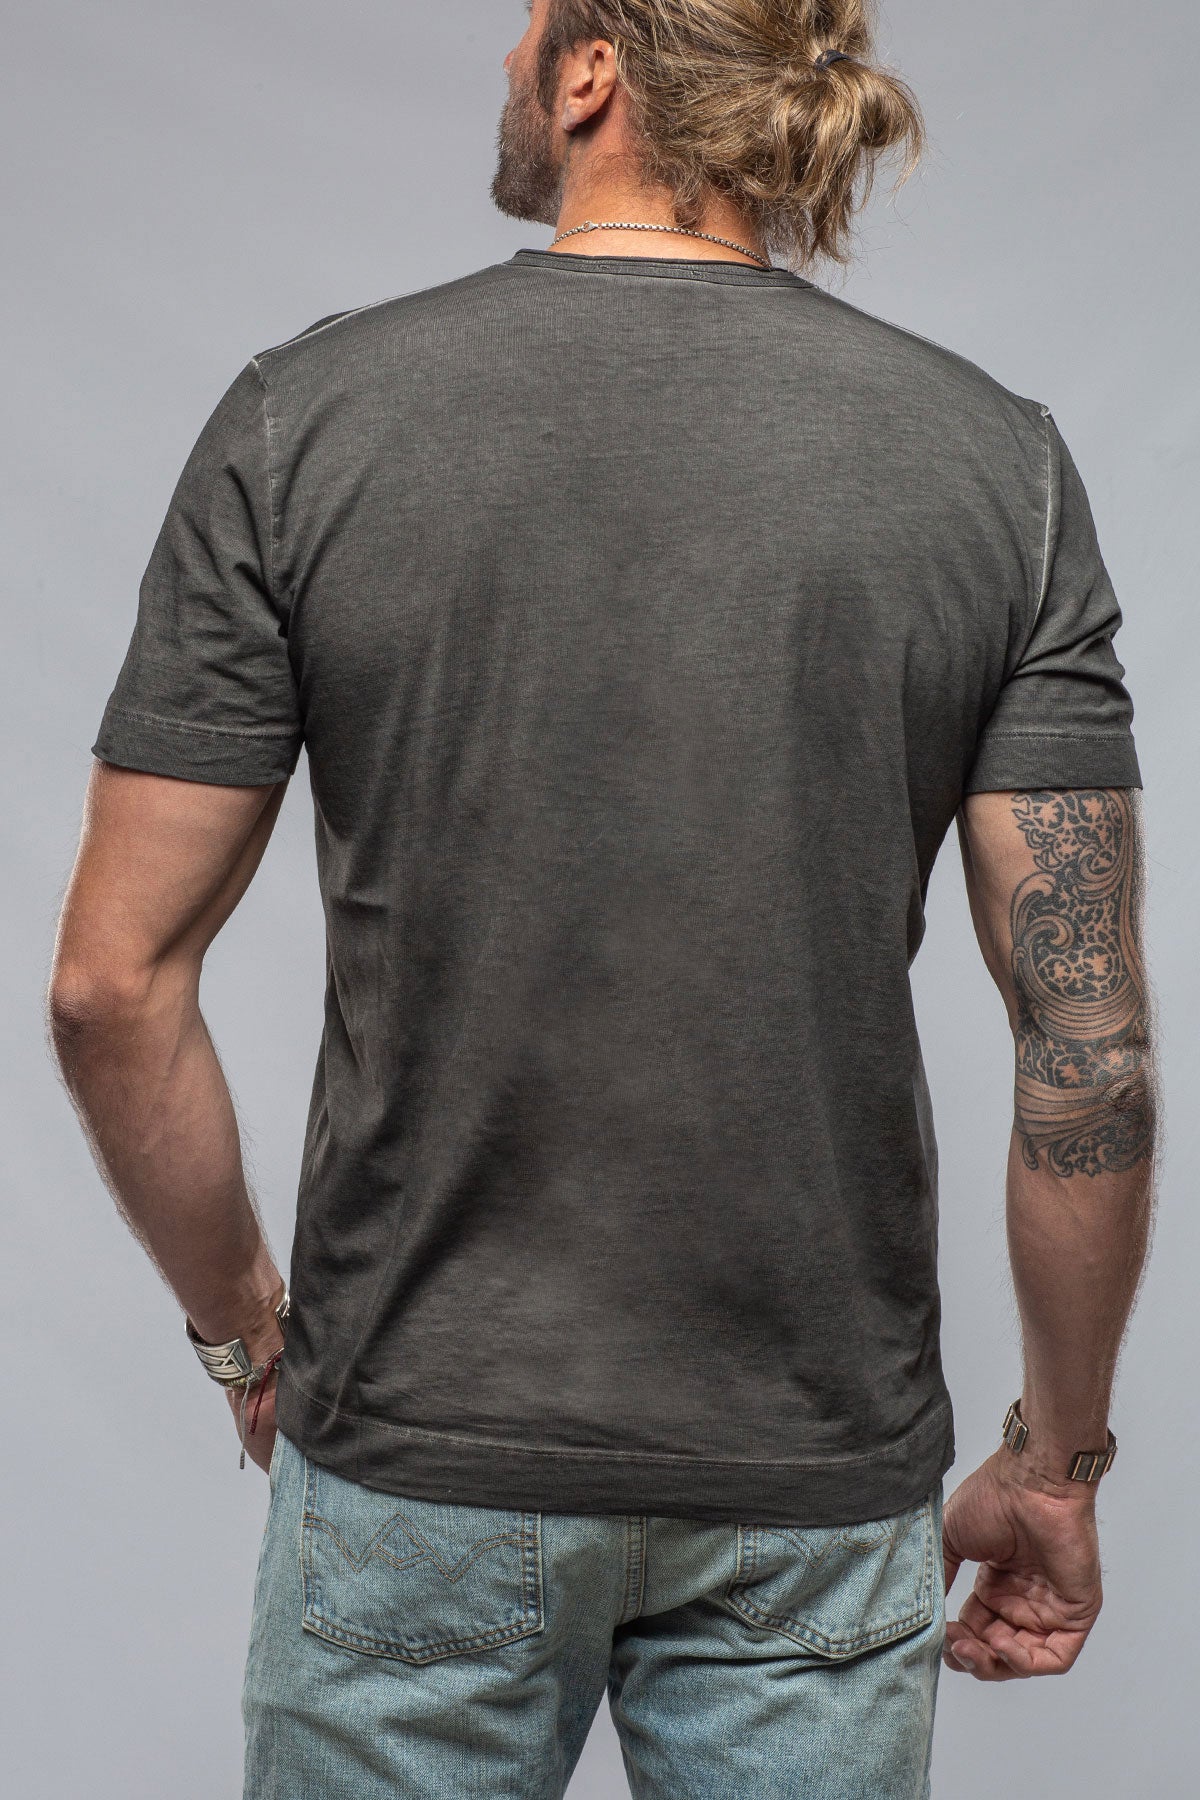 York Crew Neck in Charcoal | Mens - Shirts - T-Shirts | Gimo's Cotton